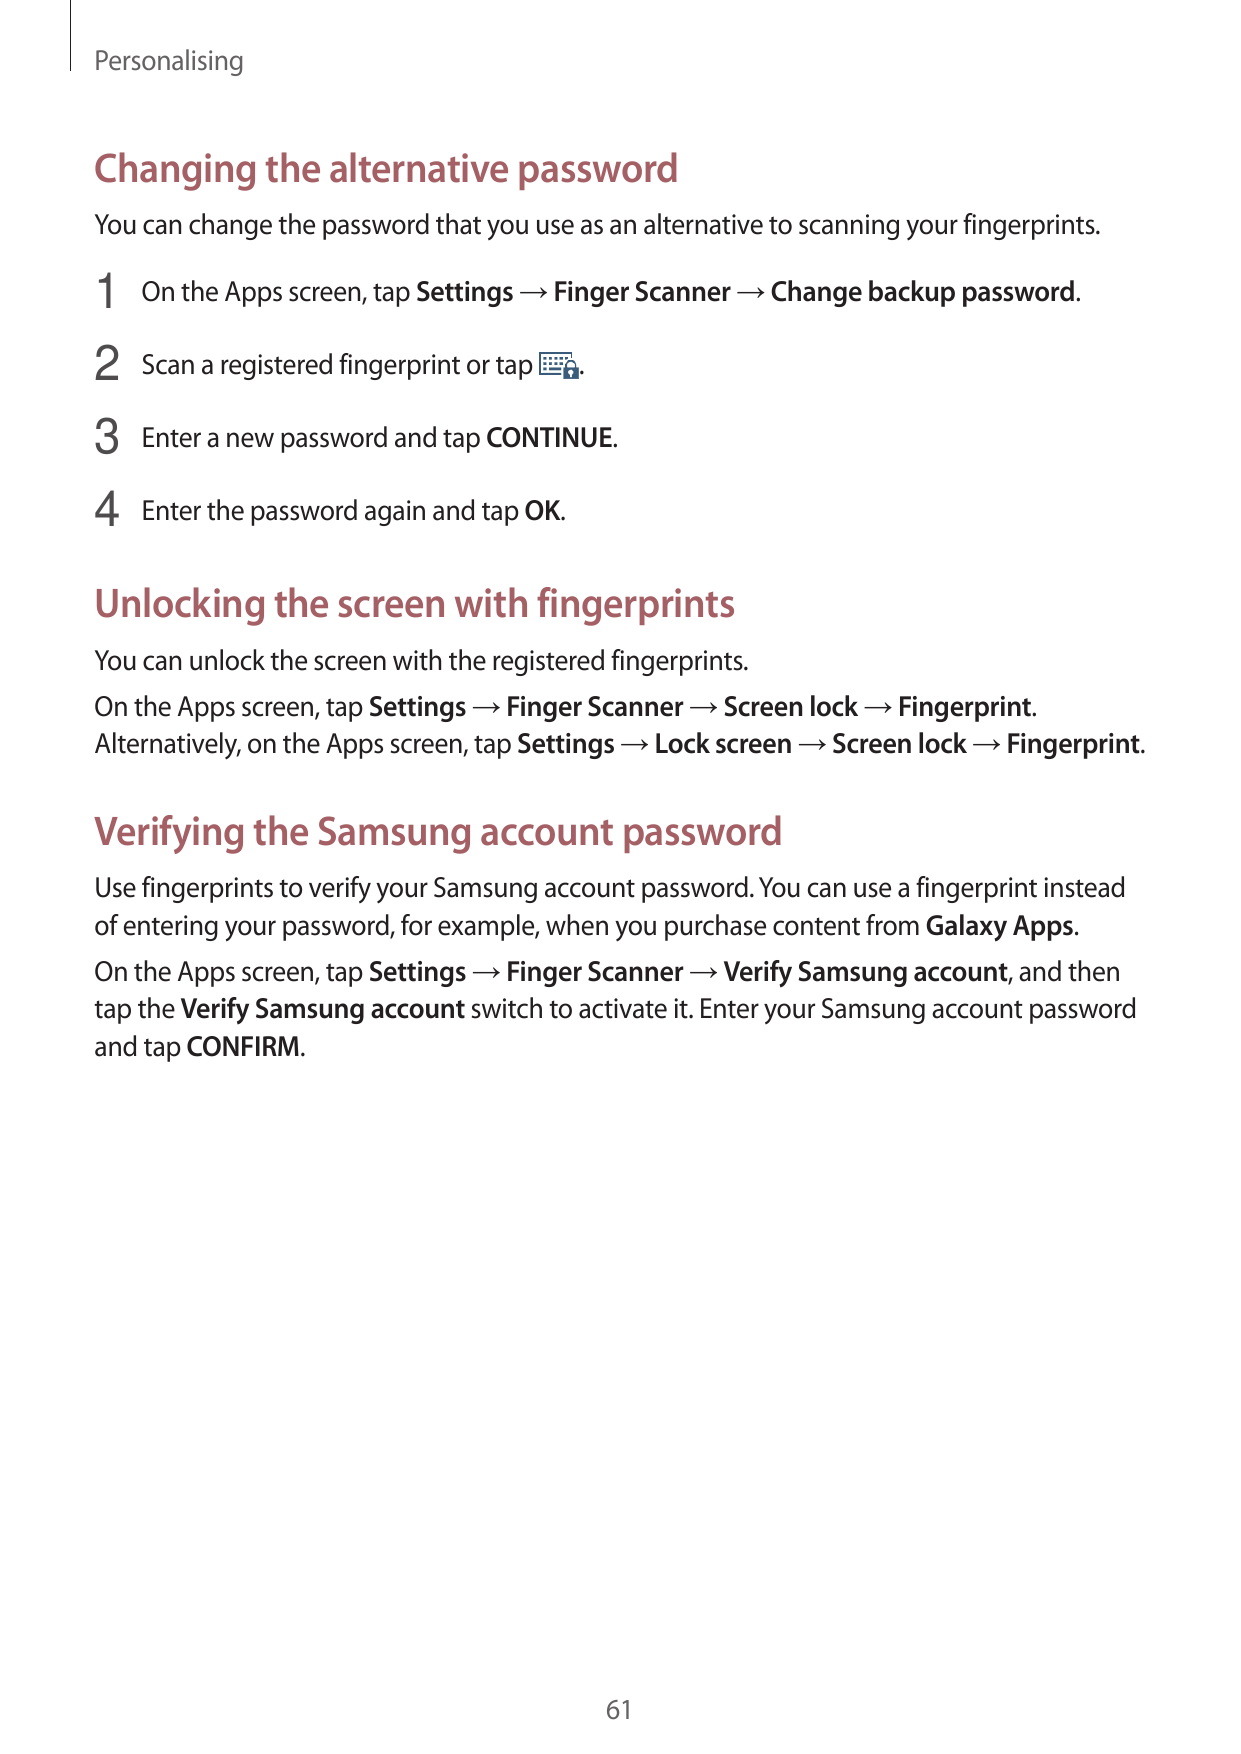 PersonalisingChanging the alternative passwordYou can change the password that you use as an alternative to scanning your finger